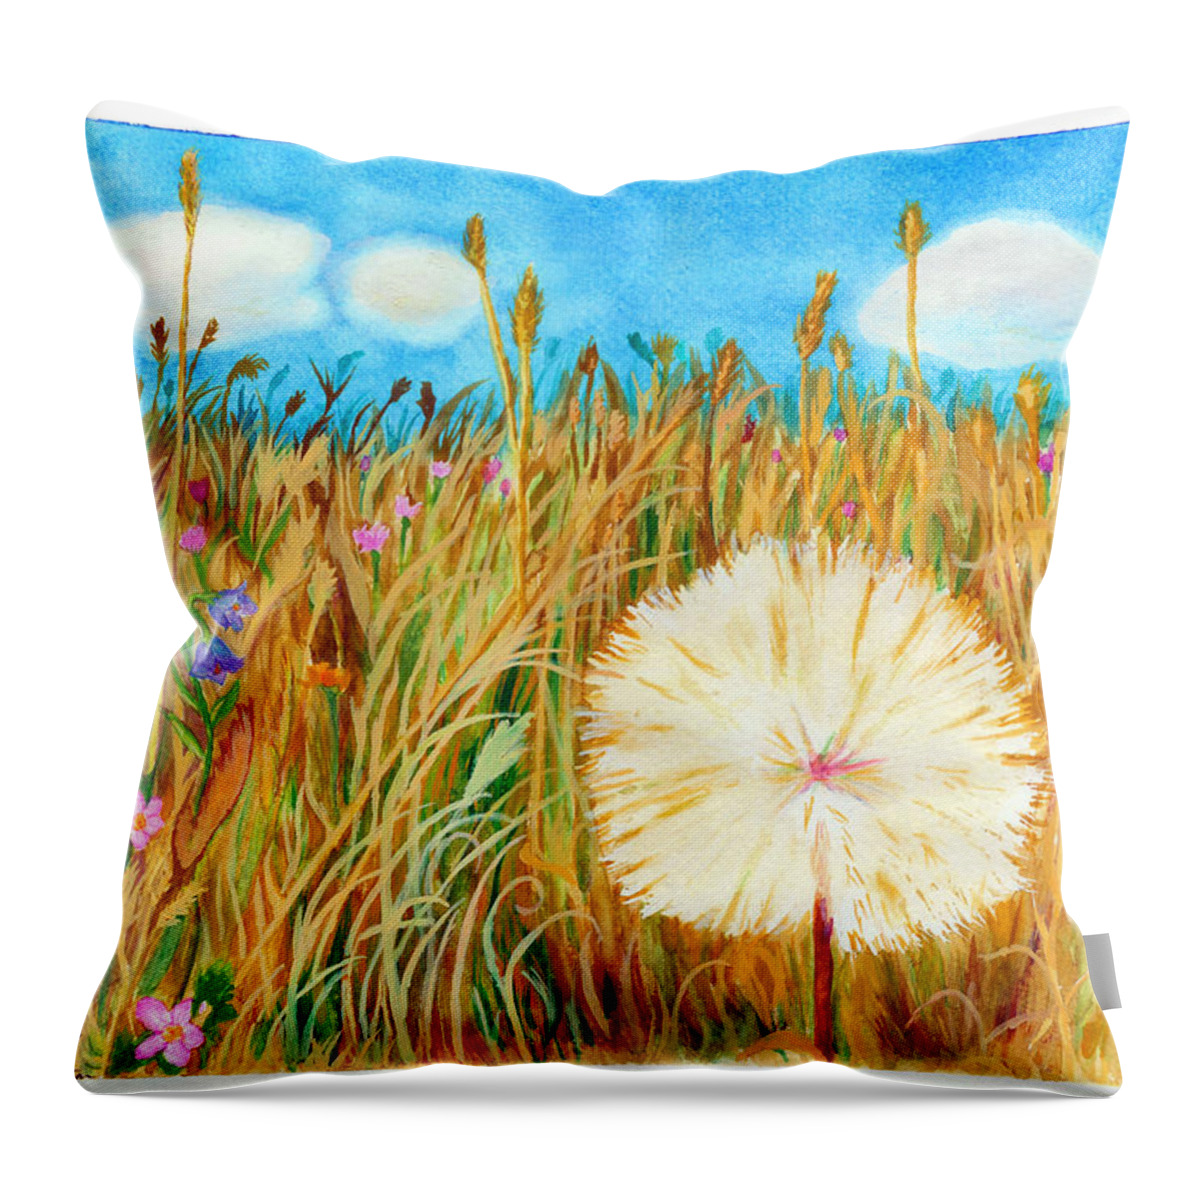 C Sitton Paintings Throw Pillow featuring the painting Montana Hike by C Sitton